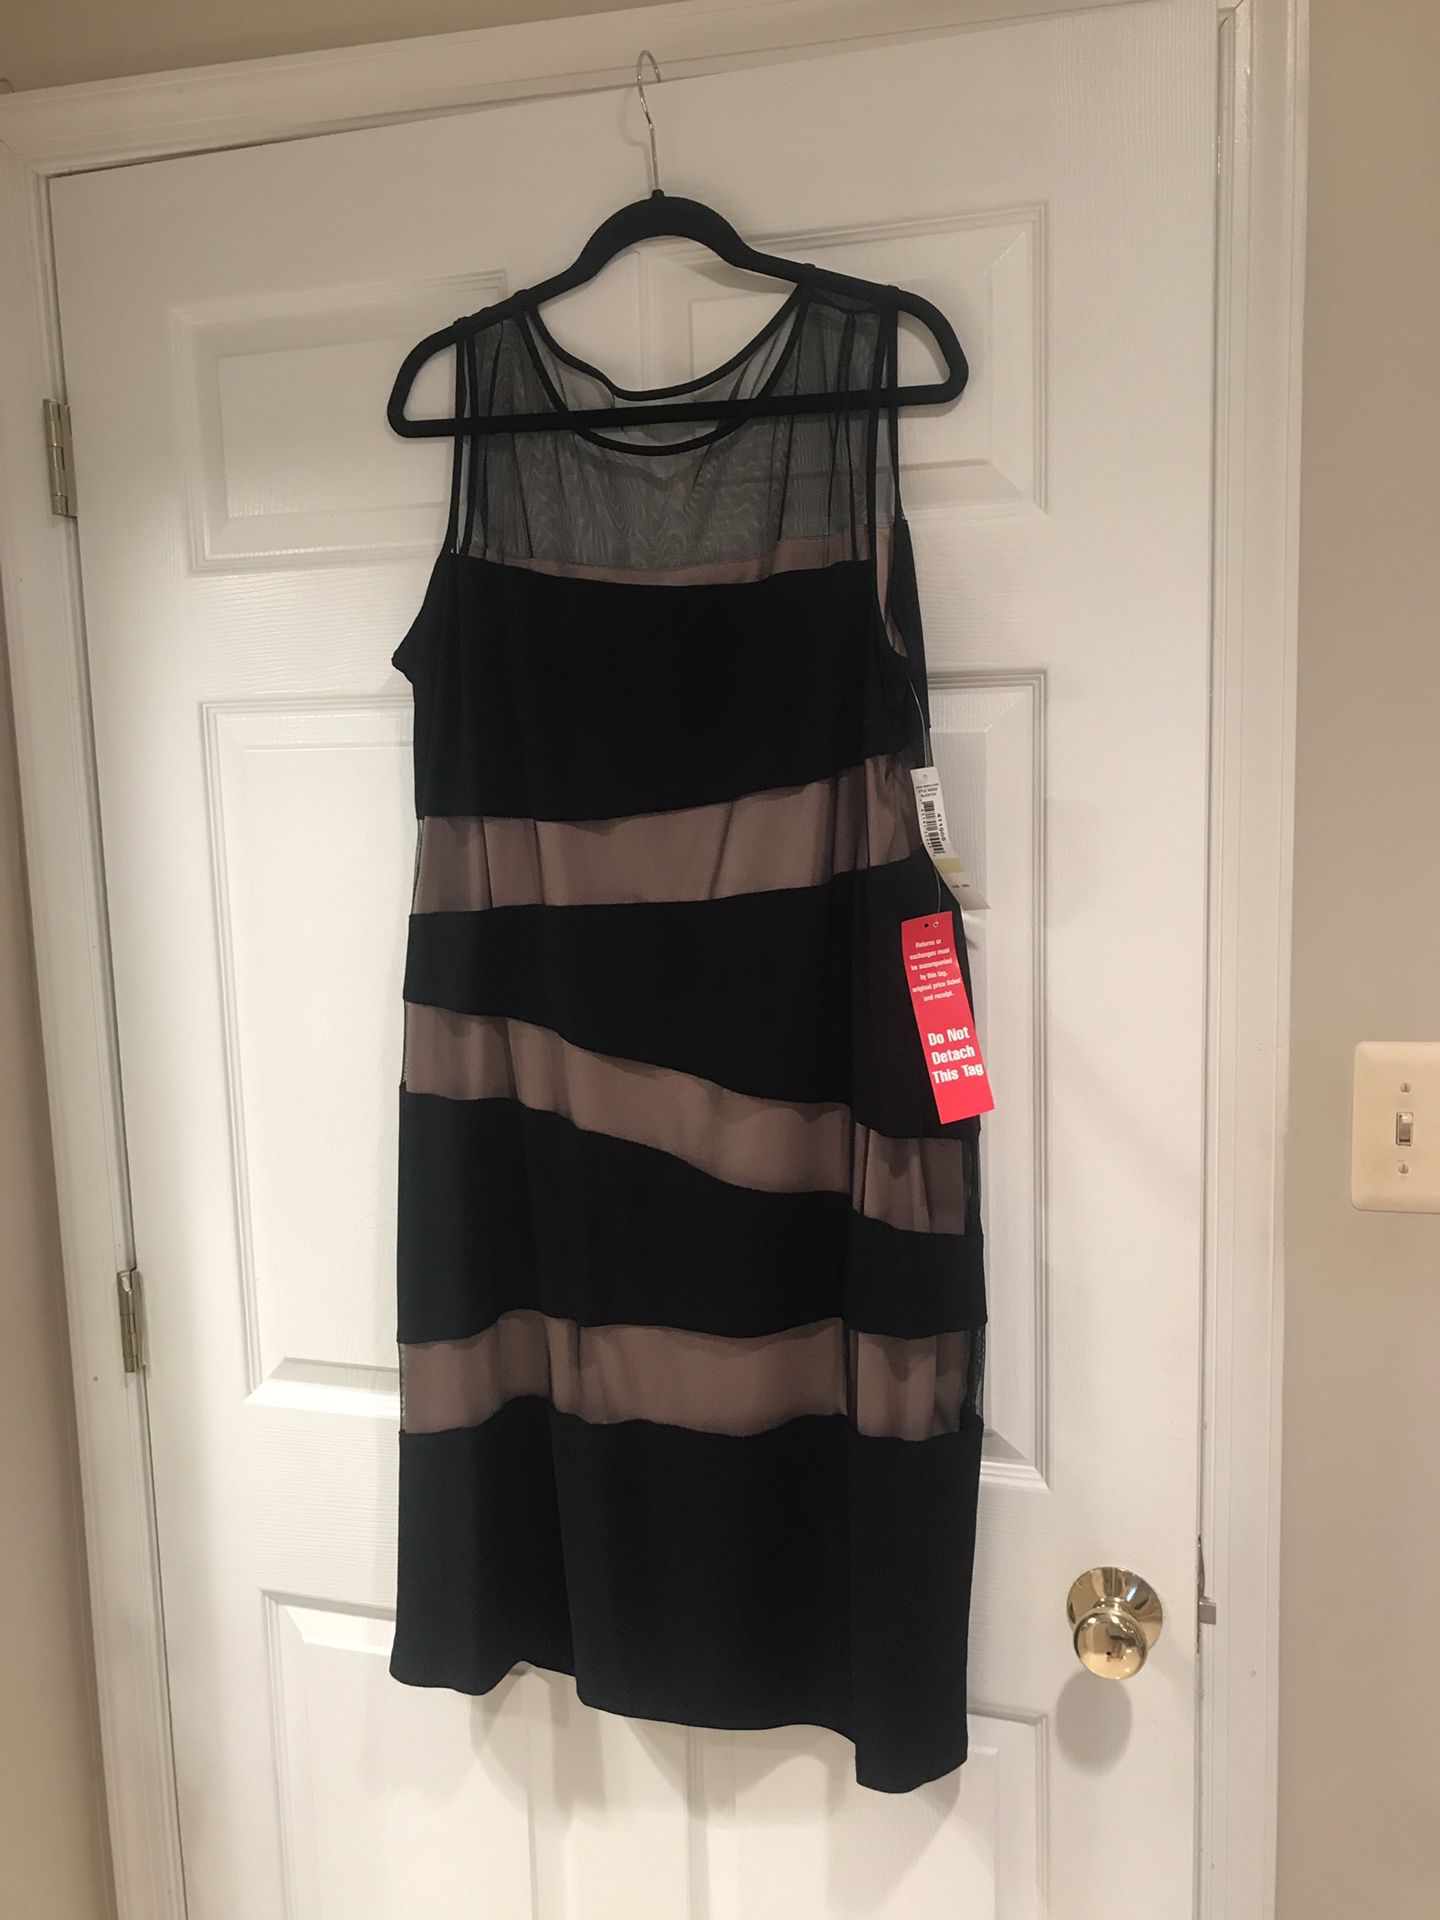 BRAND NEW SIZE 18W EVENING DRESS WITH TAGS